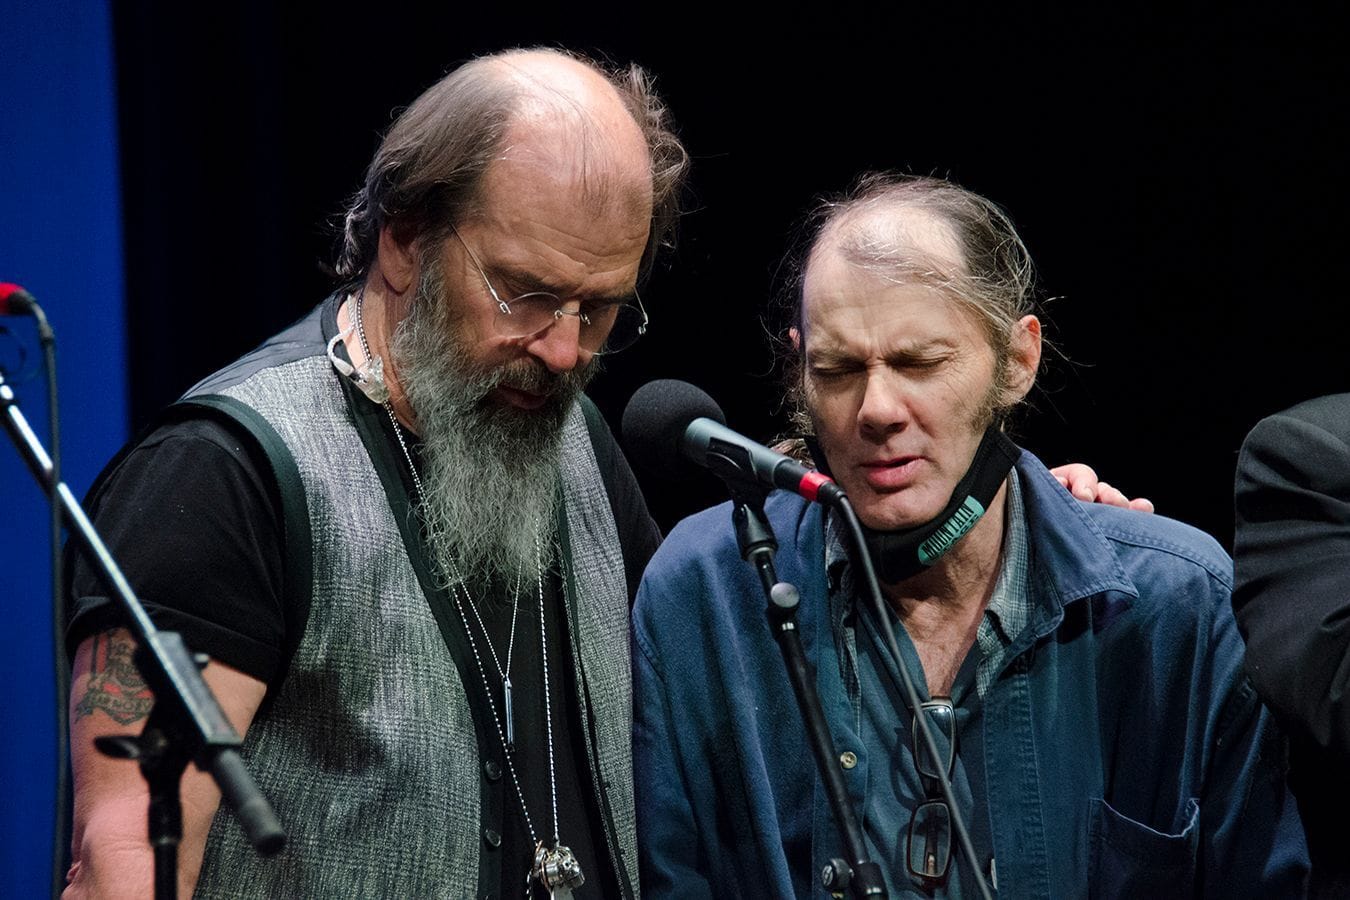 Steve Earle has his left arm around Malcolm Holcombe on stage.